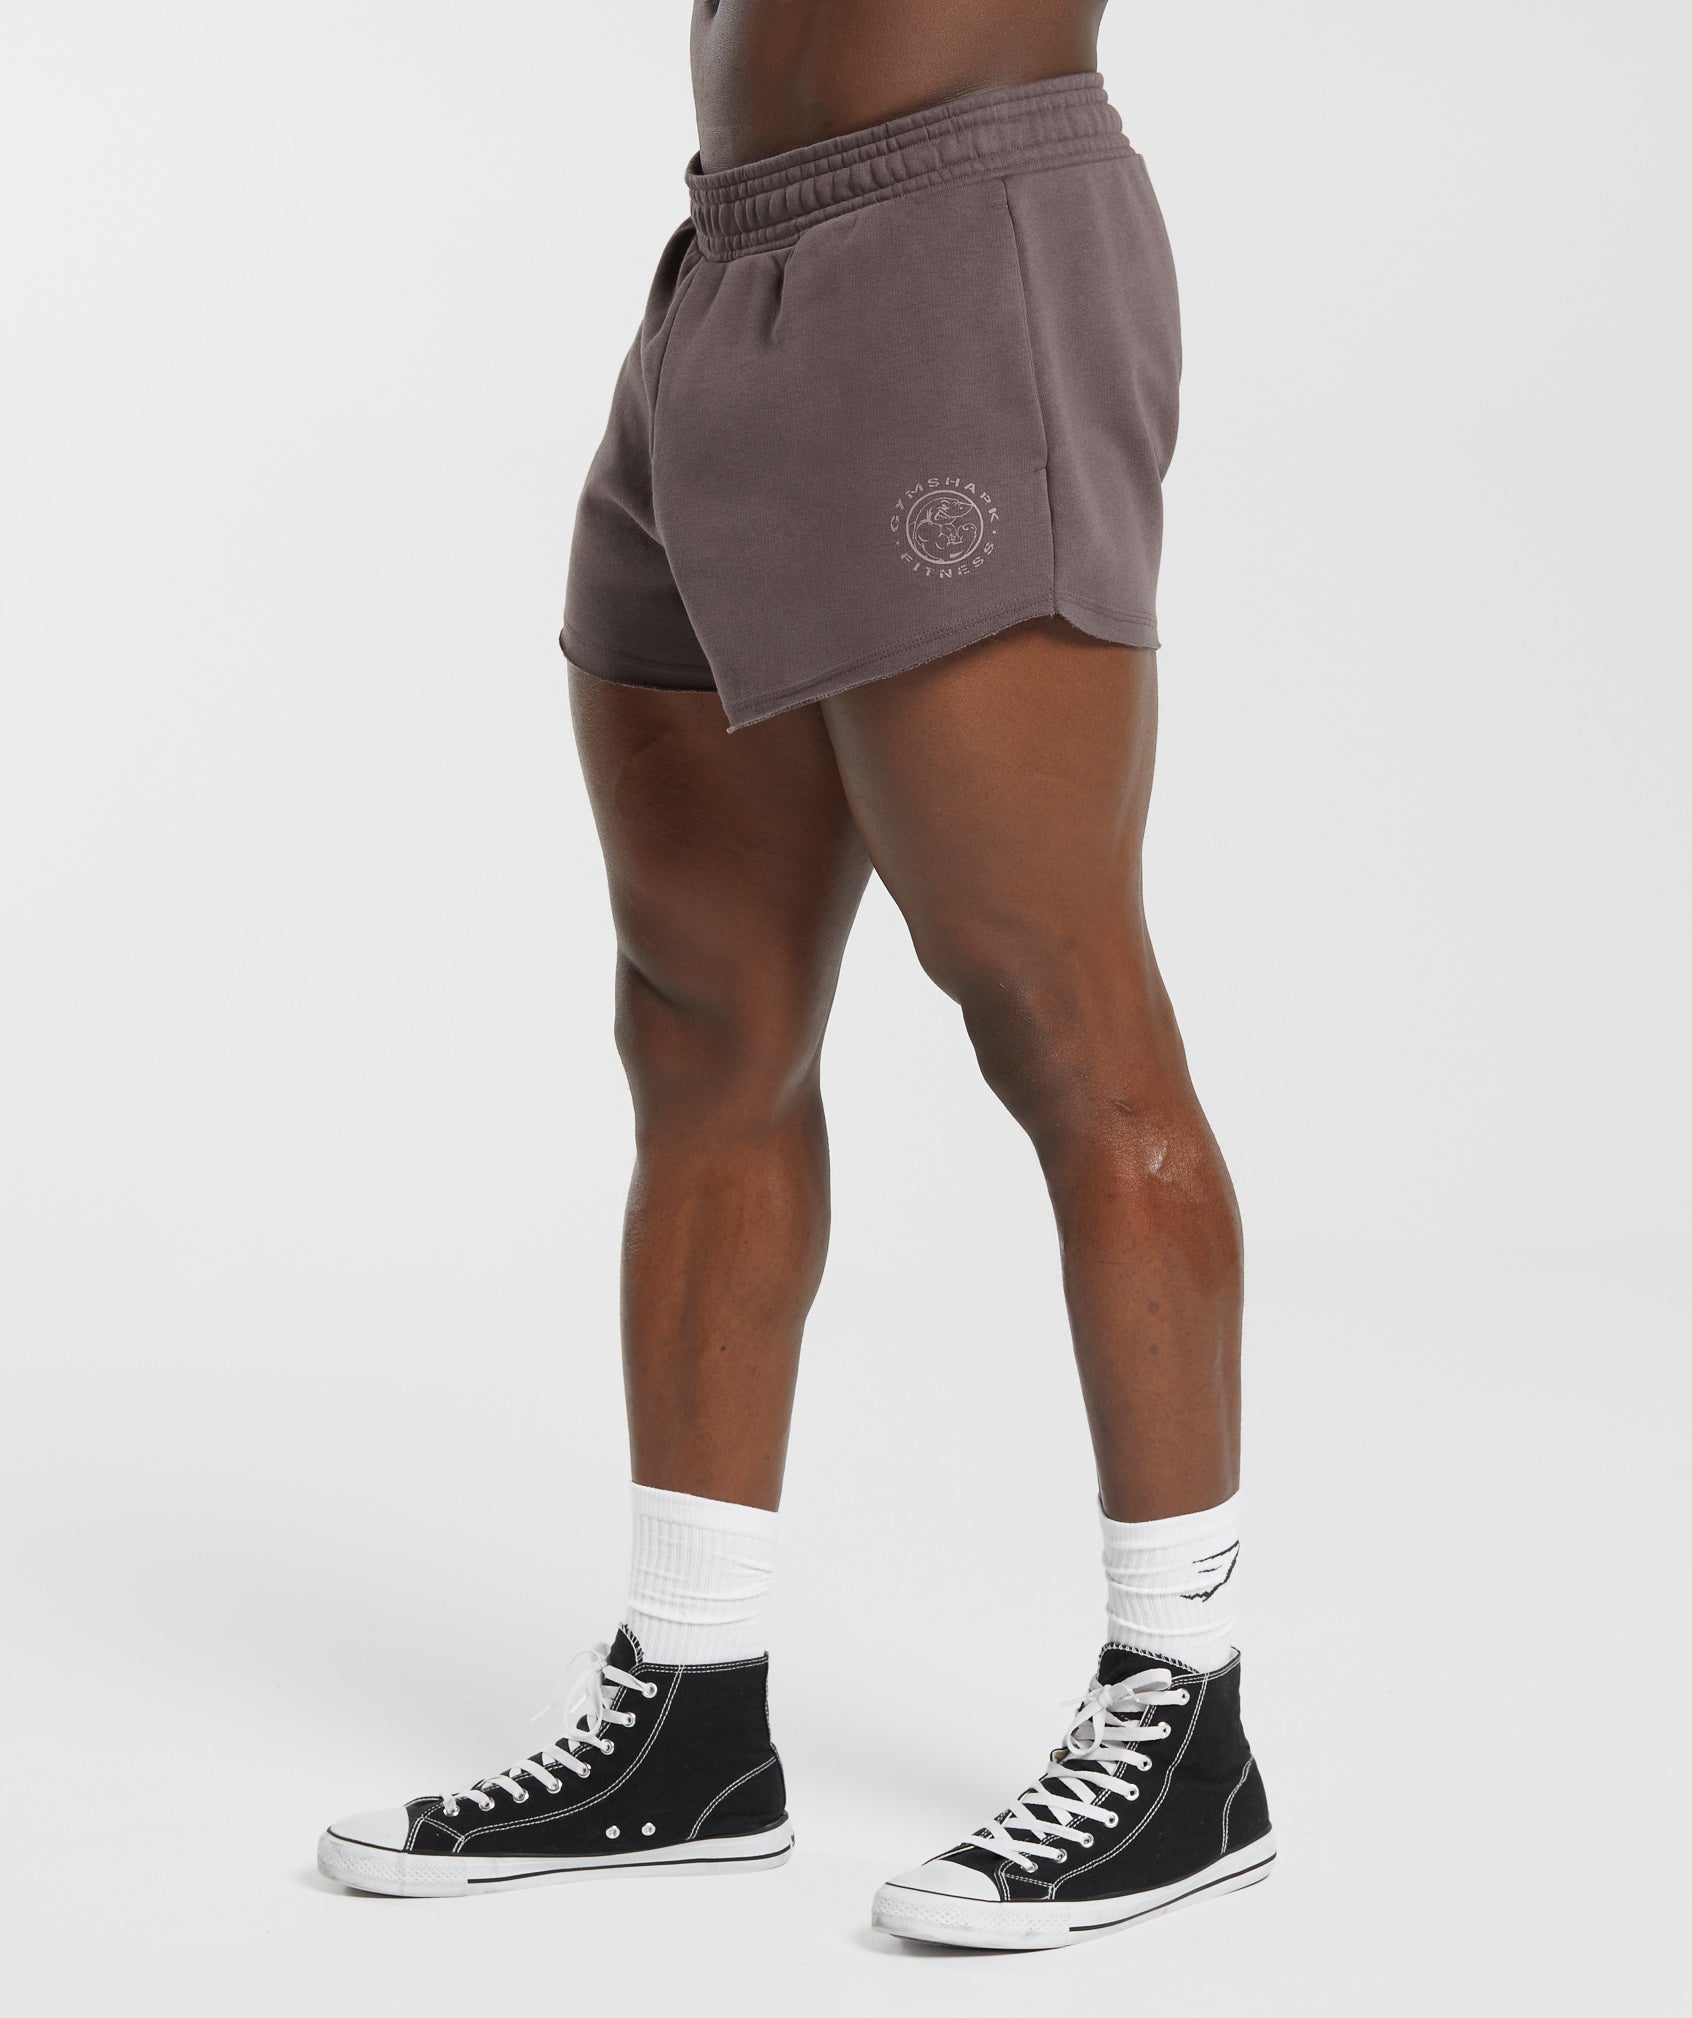 Legacy 4" Shorts in Walnut Mauve - view 3